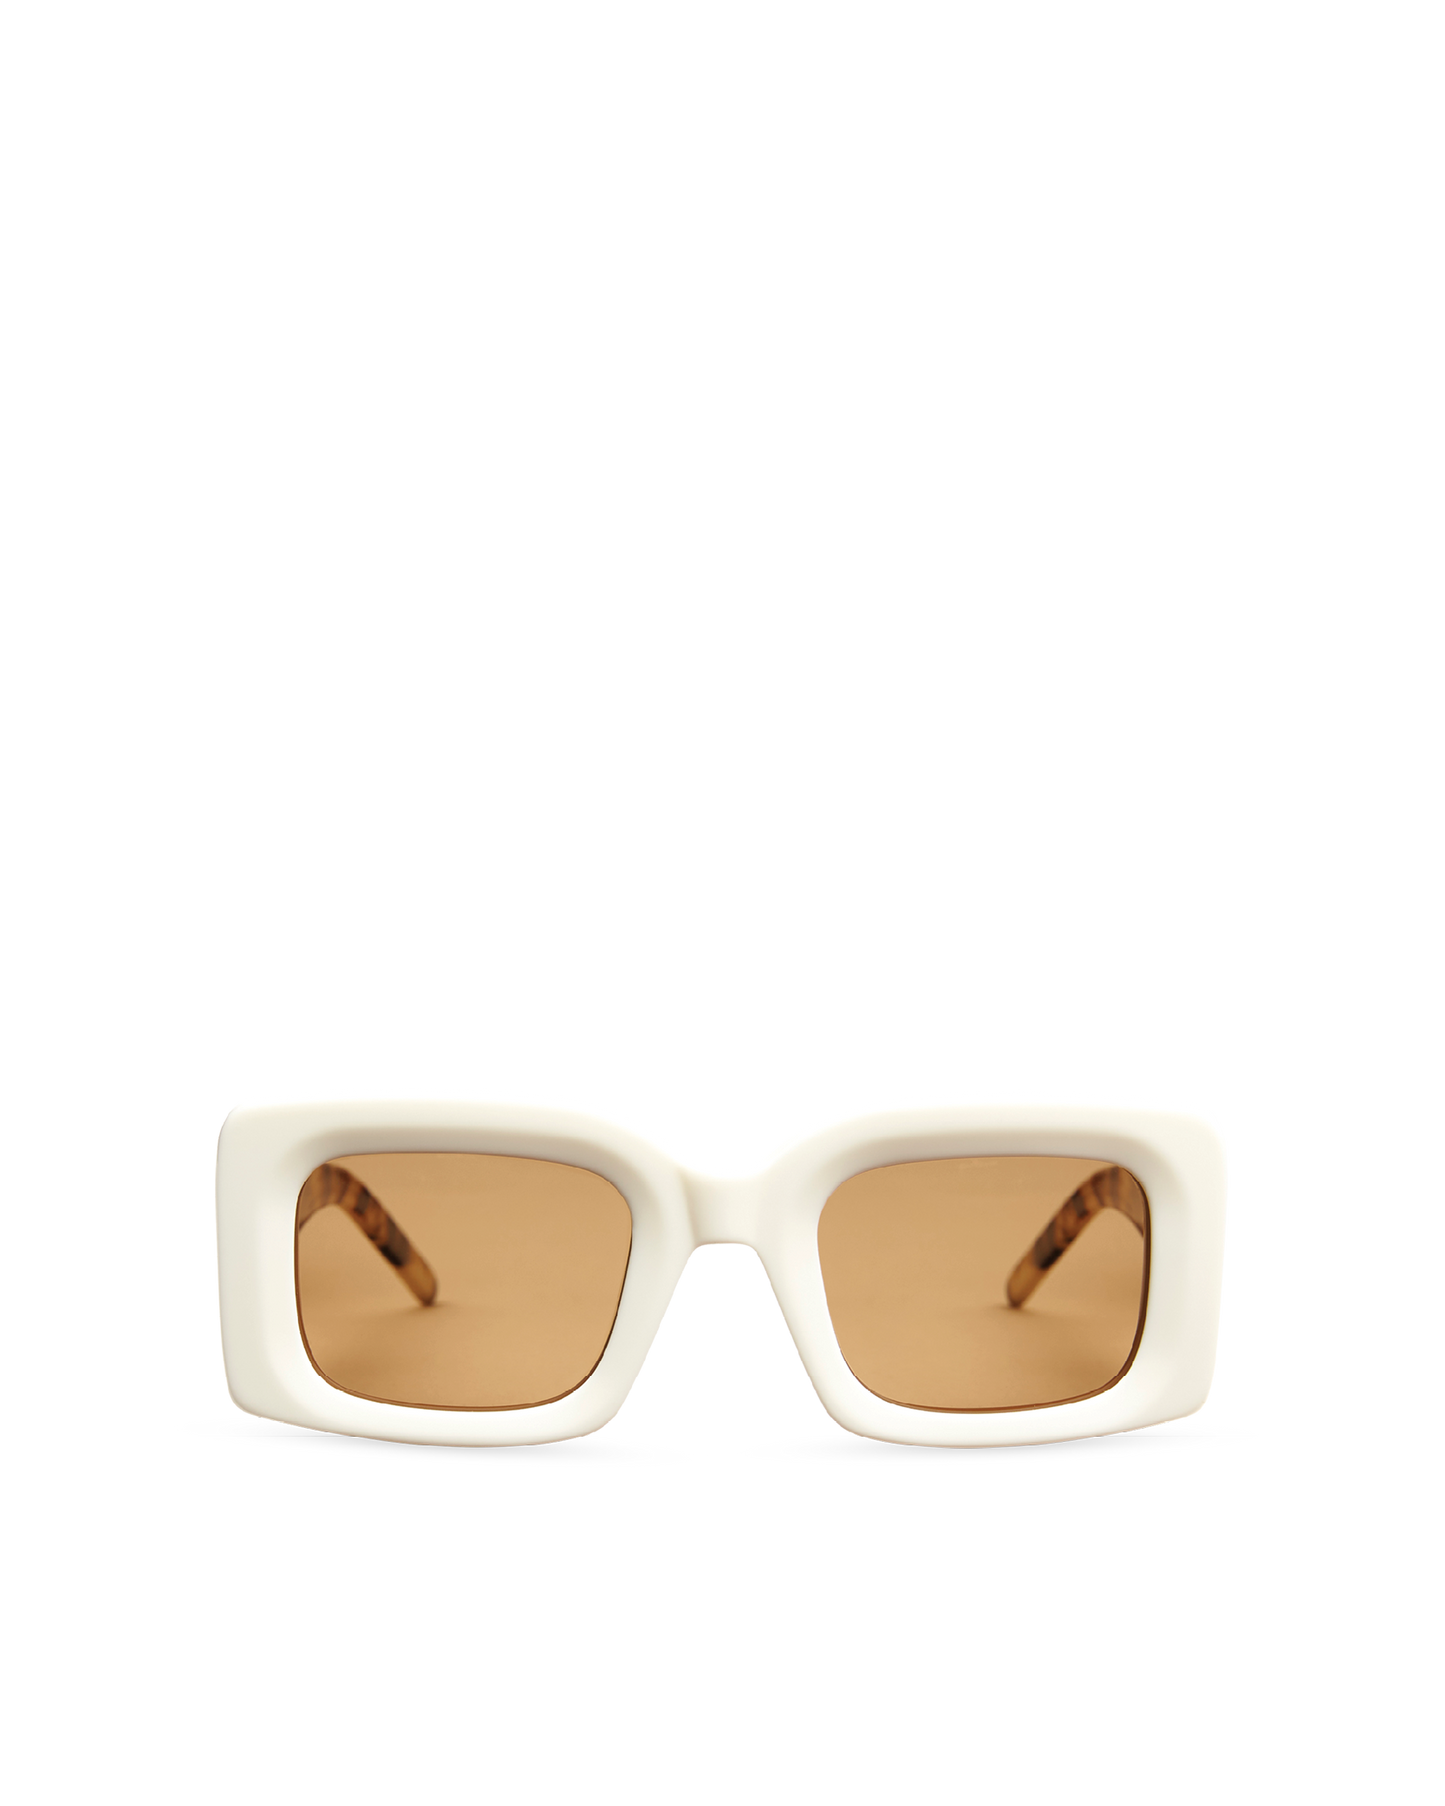 THE KENDALL - IVORY & BLONDE TORT-BROWN-SUNGLASSES-BANBE-O/S-Billini